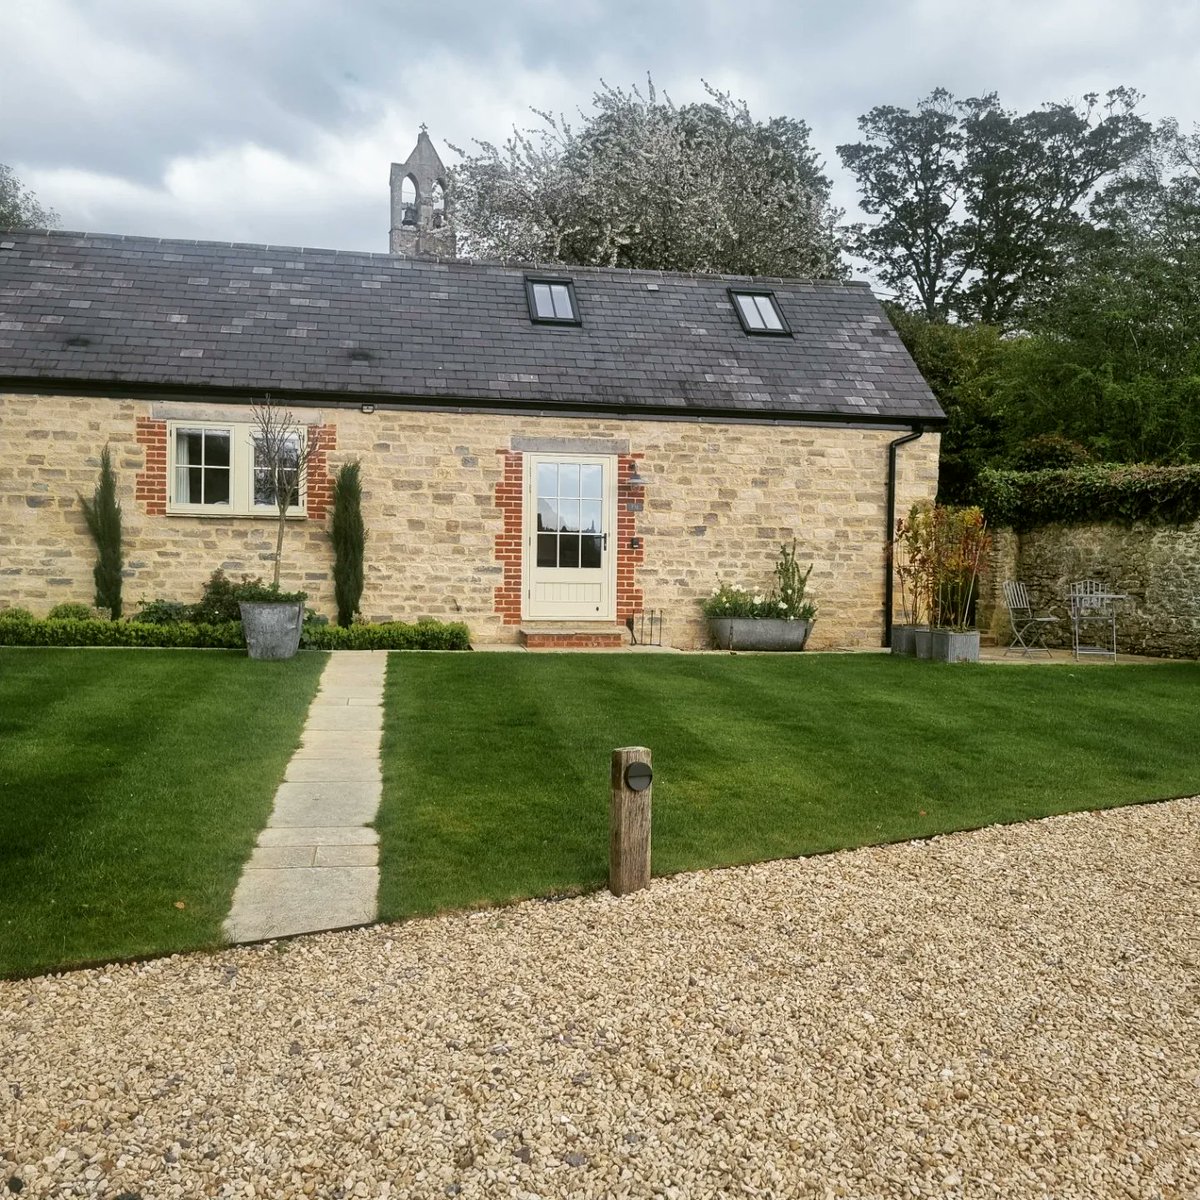 End to another busy weekend getting the garden in shape for our lovely guests! 🌱

#grass #mowing #gardens #relax #familyfarm #ruralretreat #luxuryfarmstay #rural #natural  #relax #rest #oxfordshire #selfcatering #countryliving #countryside #timetoexplore #freshair #countrywalks